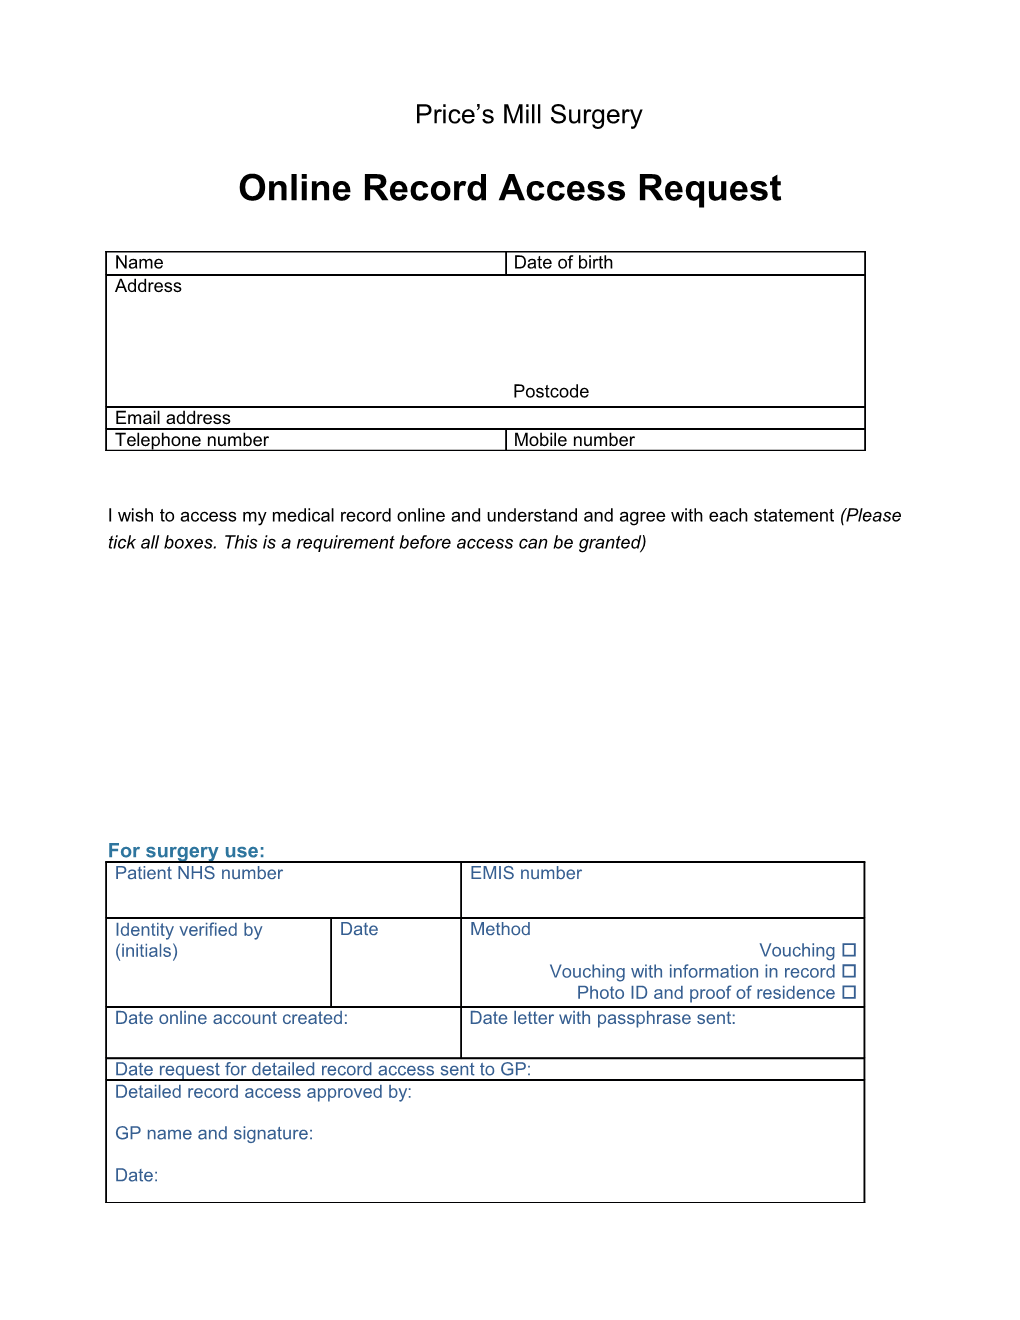 Online Record Access Request